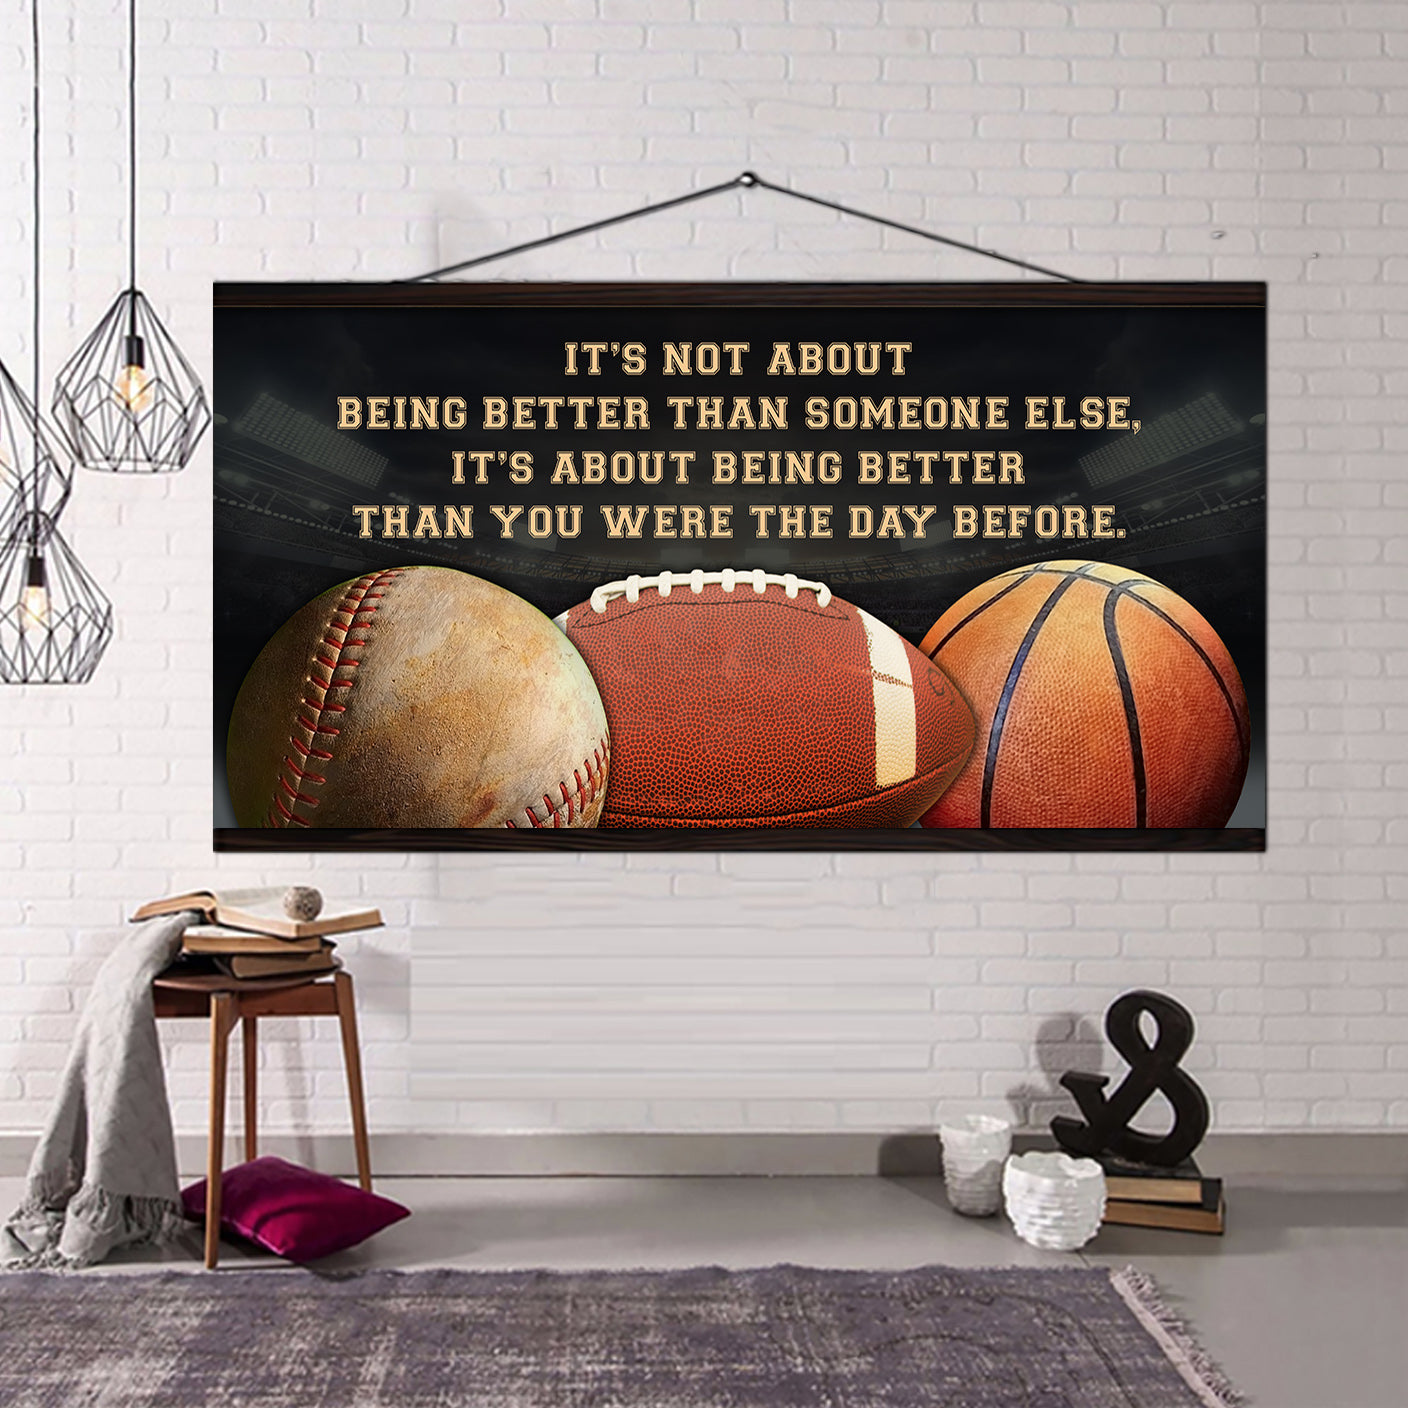 Baketball Ver 5 It is not About Being Better Than Someone Else It is about being better than you were the day before